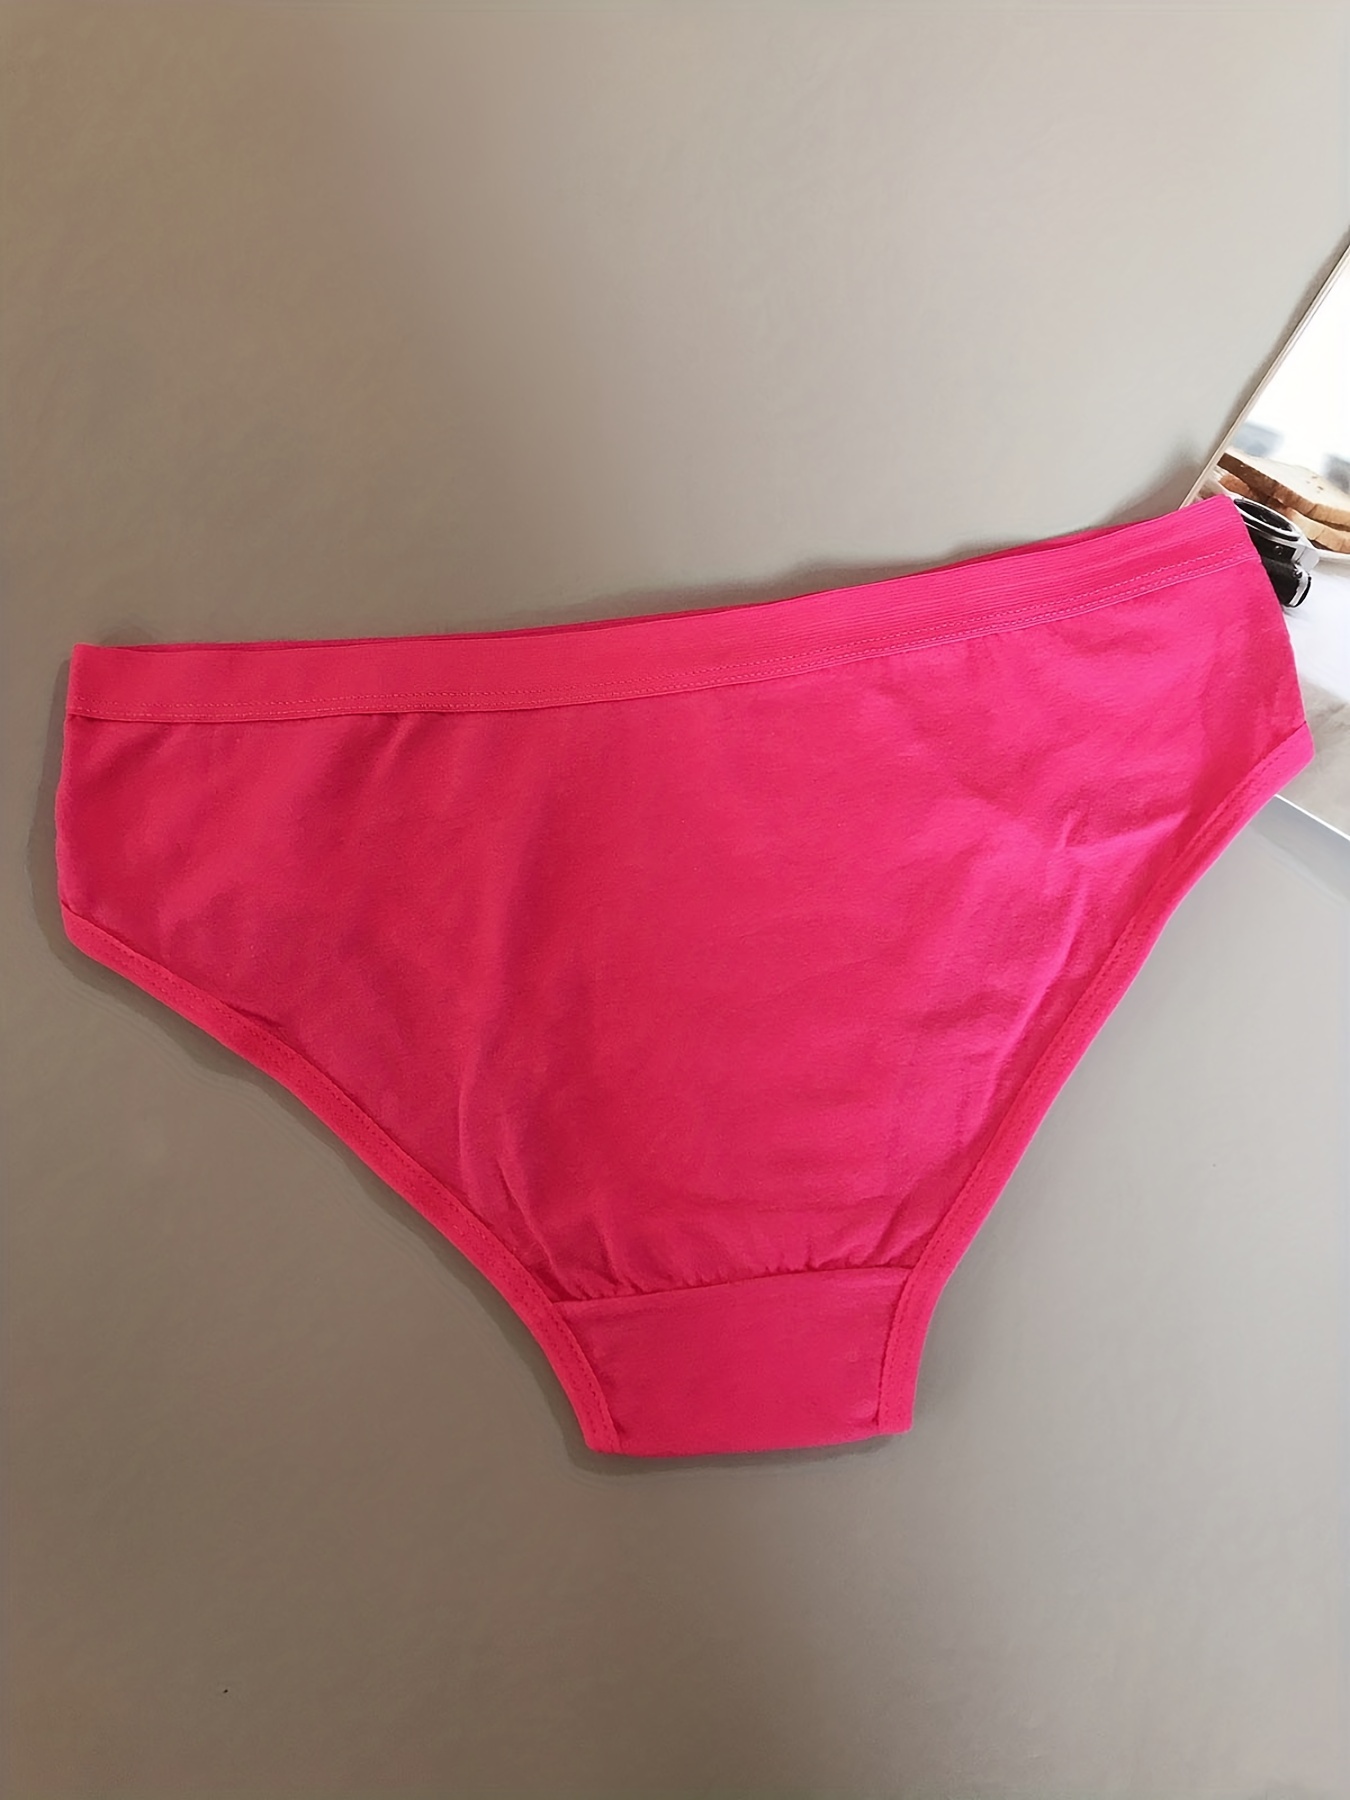 Victoria's Secret PINK Variety Mixed Logo Thong Panty Underwear, Pack of 2